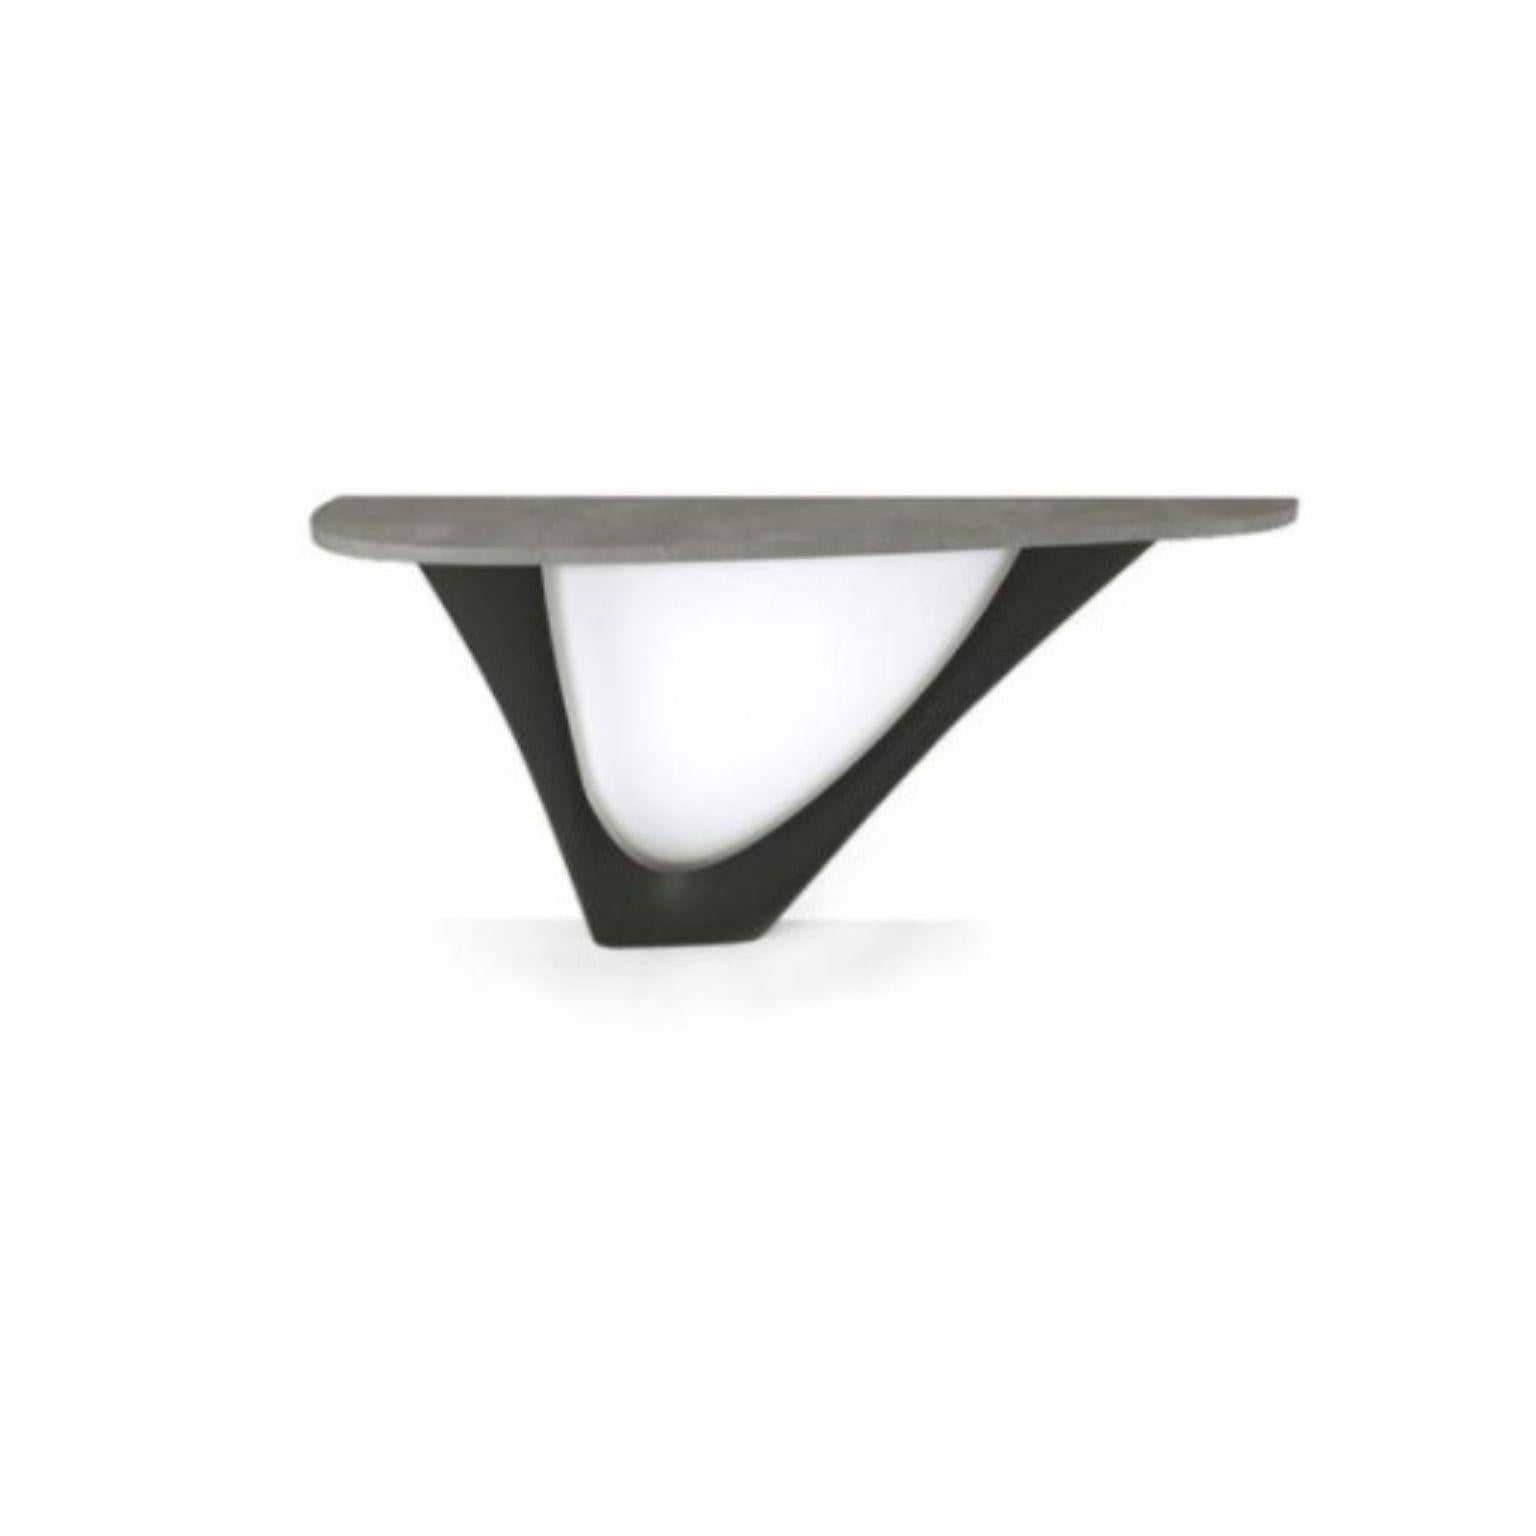 Graphite G-Console Mono Steel Base with Concrete Top by Zieta
Dimensions: D 43 x W 159 x H 75 cm 
Material: Concrete, carbon steel.
Also available in different colors and different dimensions. Please contact us.

G-Console is another bionic object